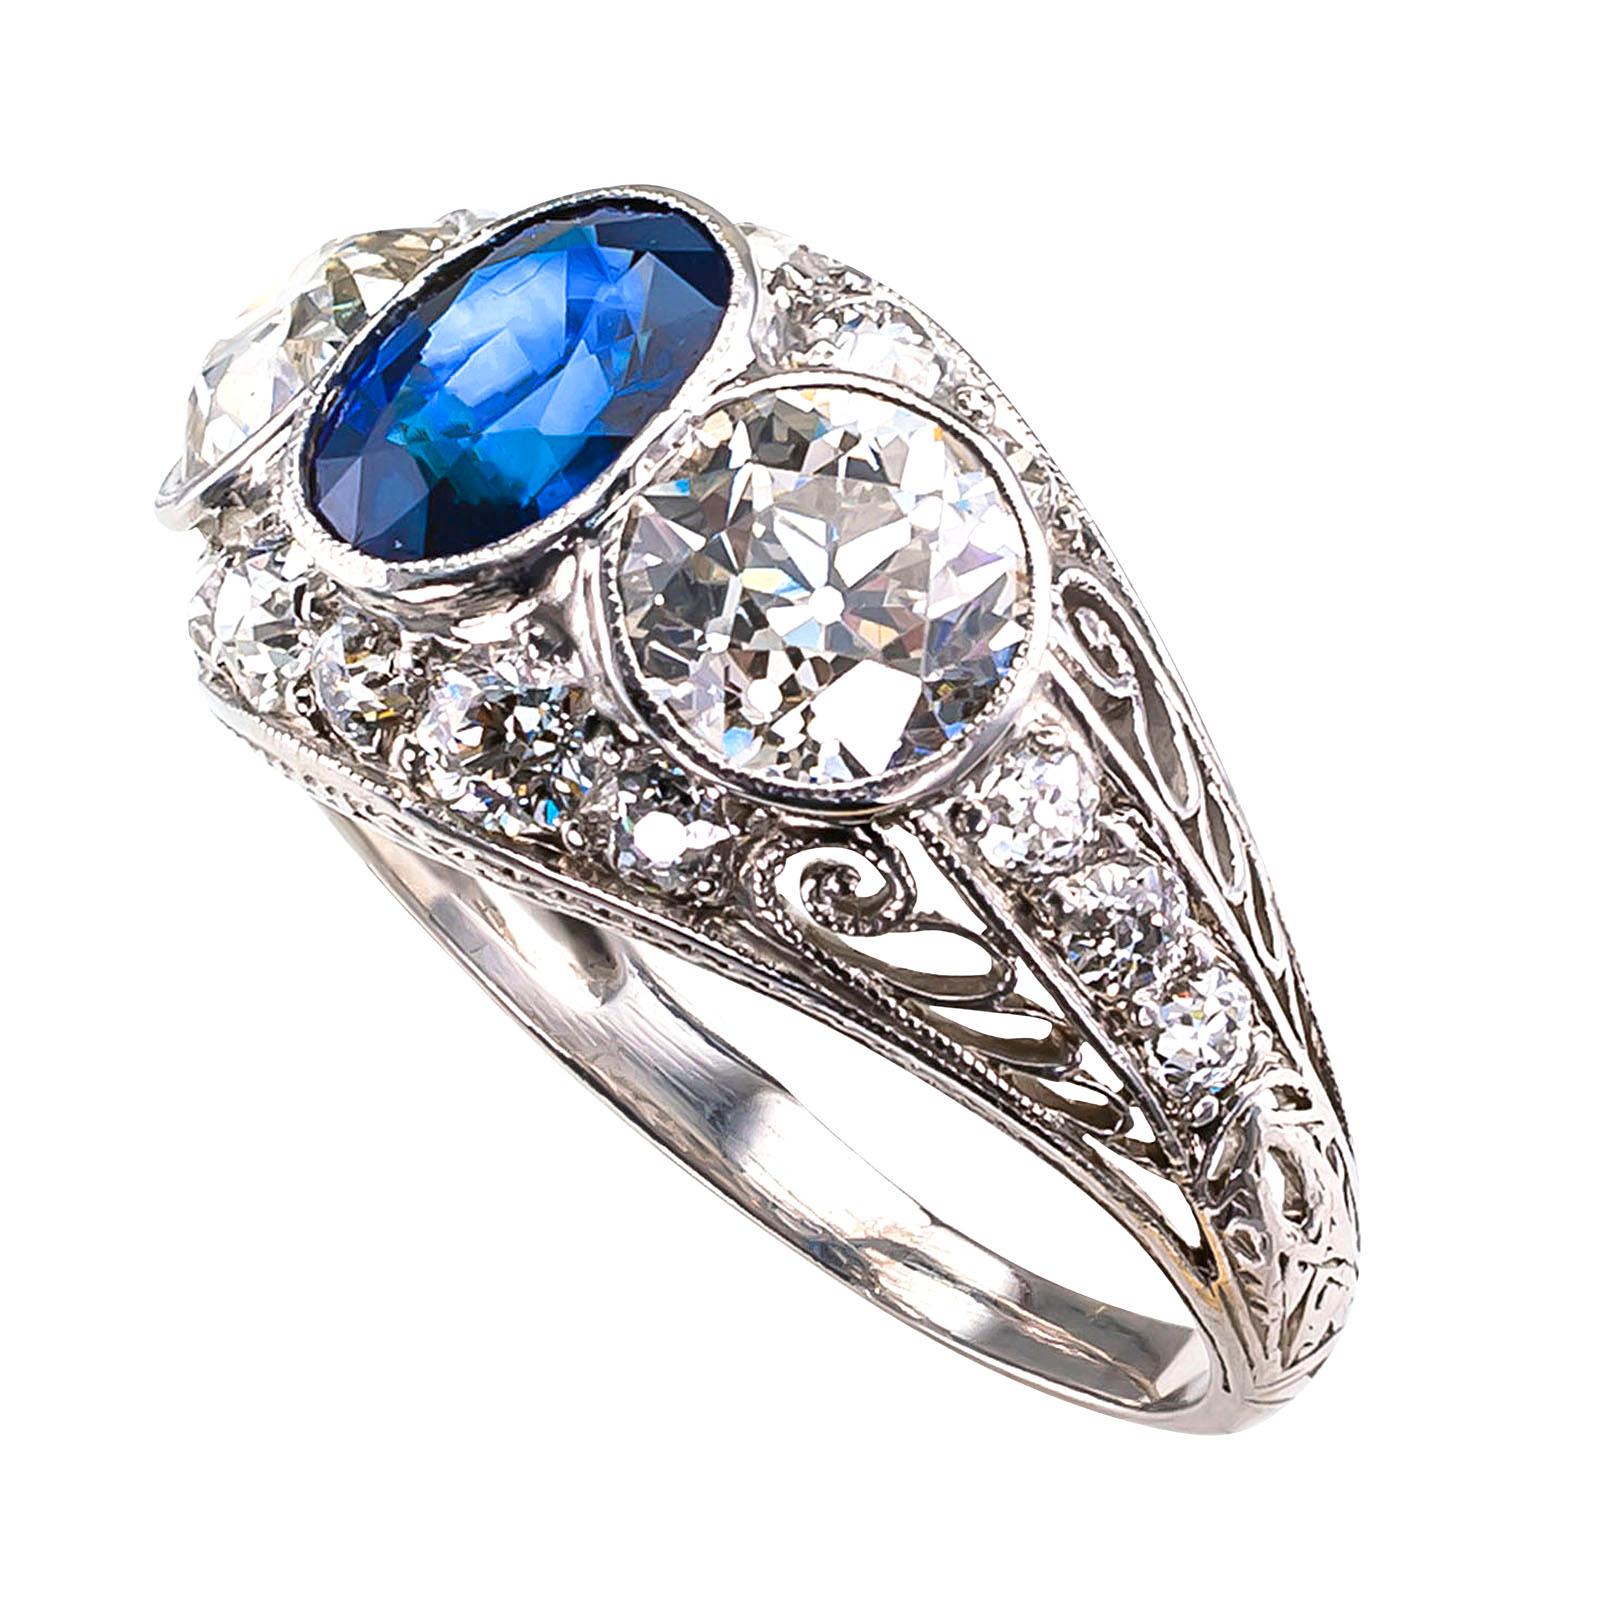 DETAILS:

Edwardian diamond and sapphire three-stone platinum ring circa 1910.

DIAMONDS: two old European-cut diamonds totaling 2.02 carats, accompanied by a reports from EGL-USA stating that the diamonds are I – J color and VS1 clarity.

SMALL